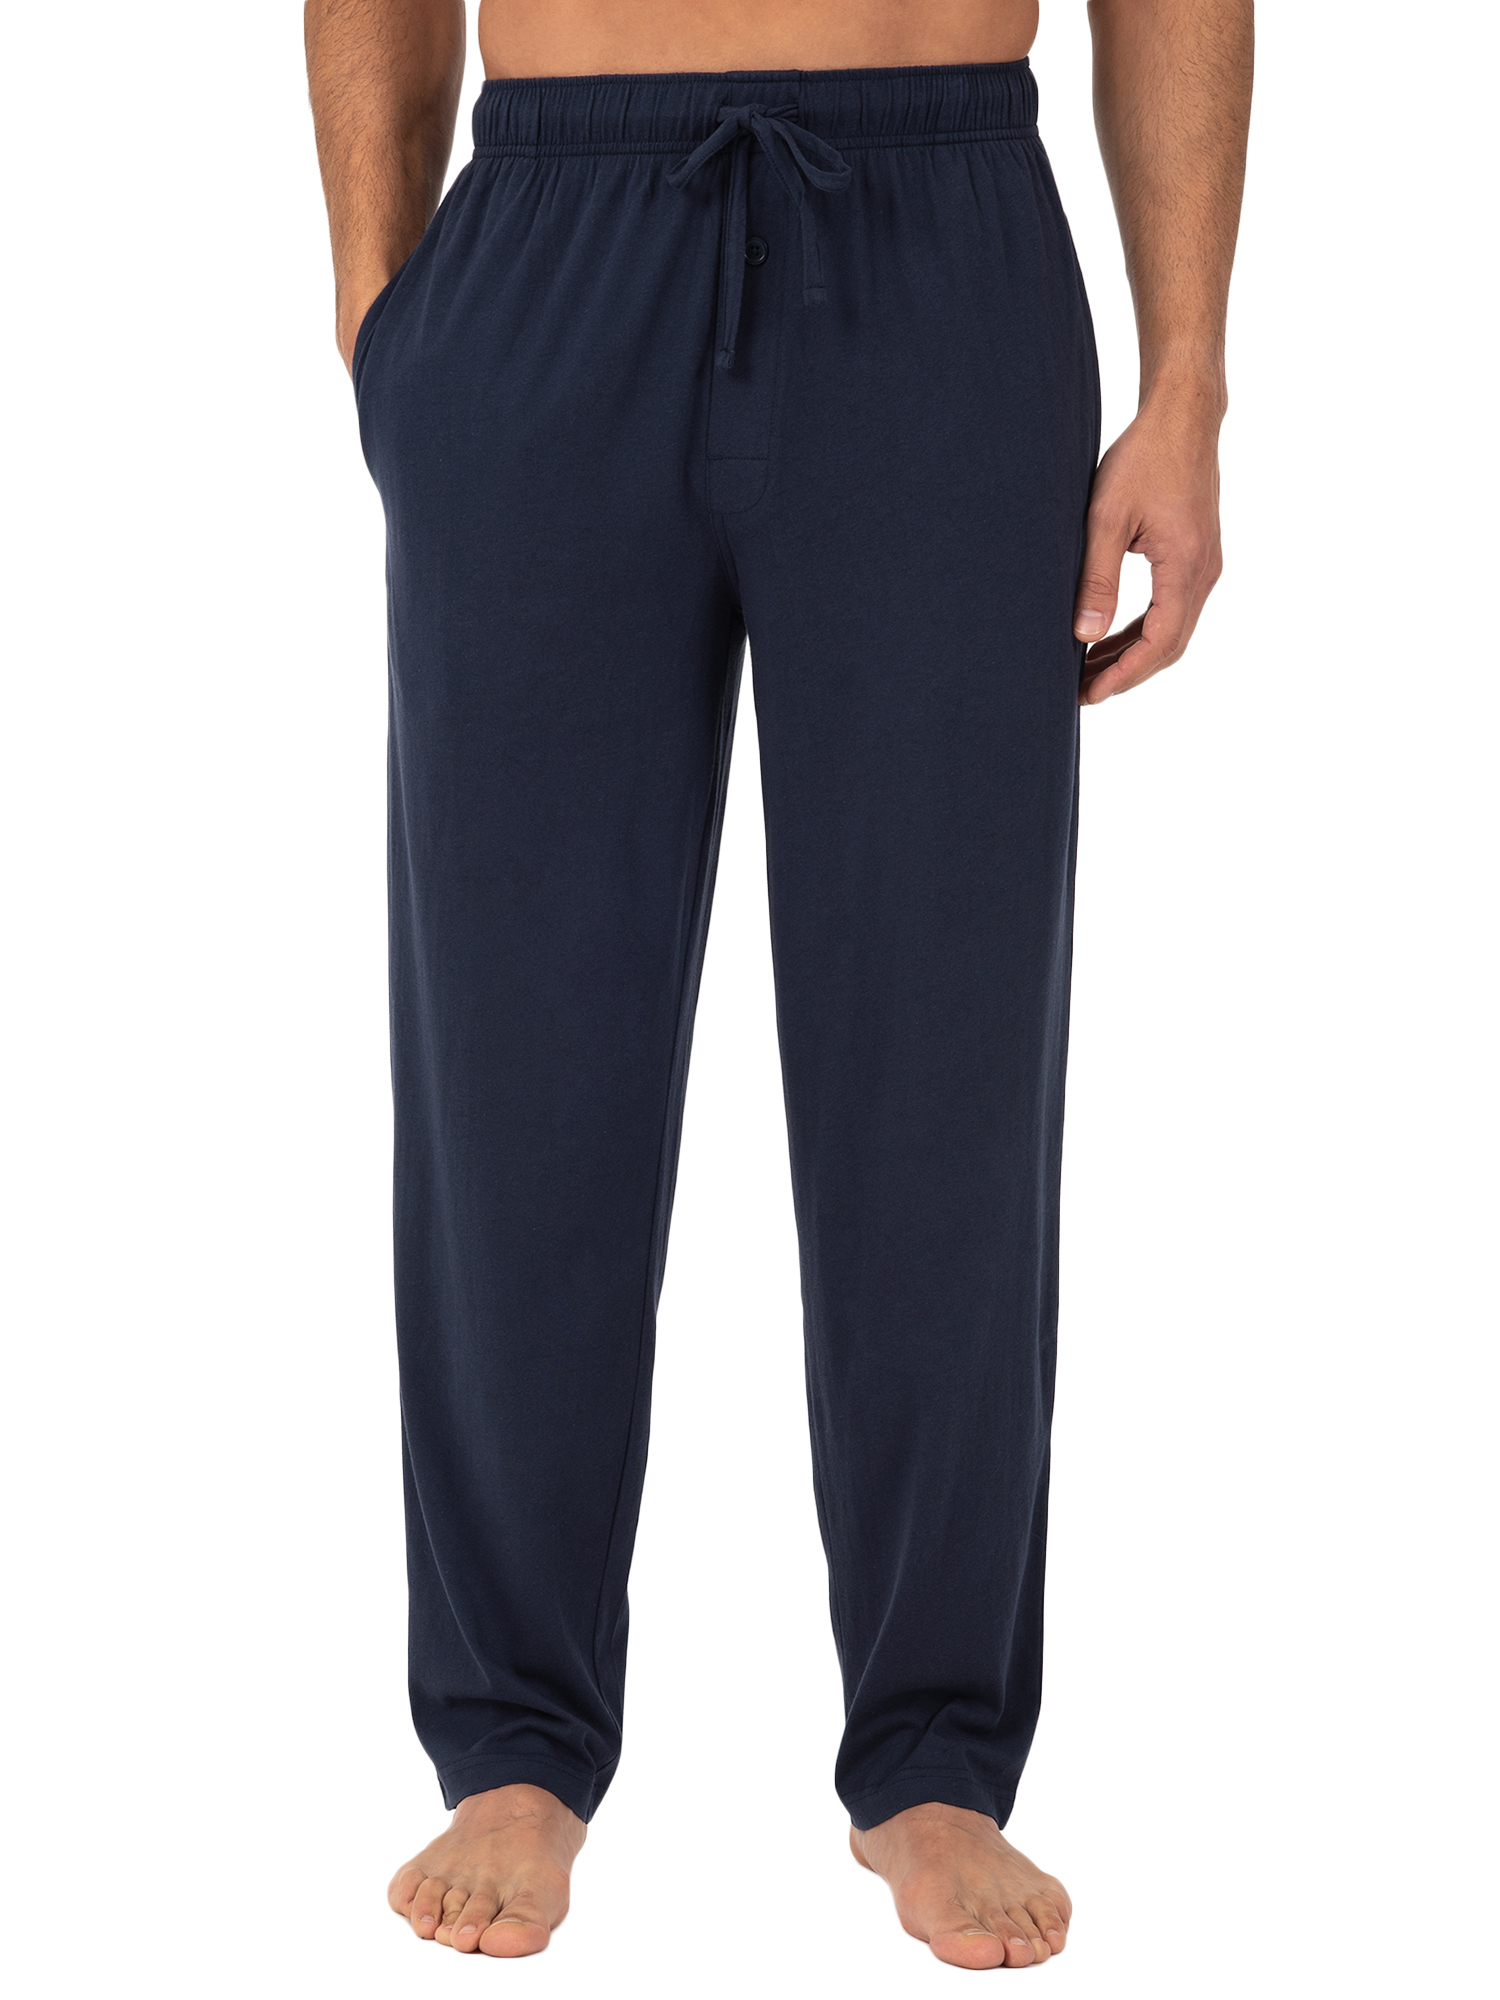 Fruit of the Loom Men's and Big Men's Jersey Knit Pajama Pants, Sizes S-6XL - image 1 of 7